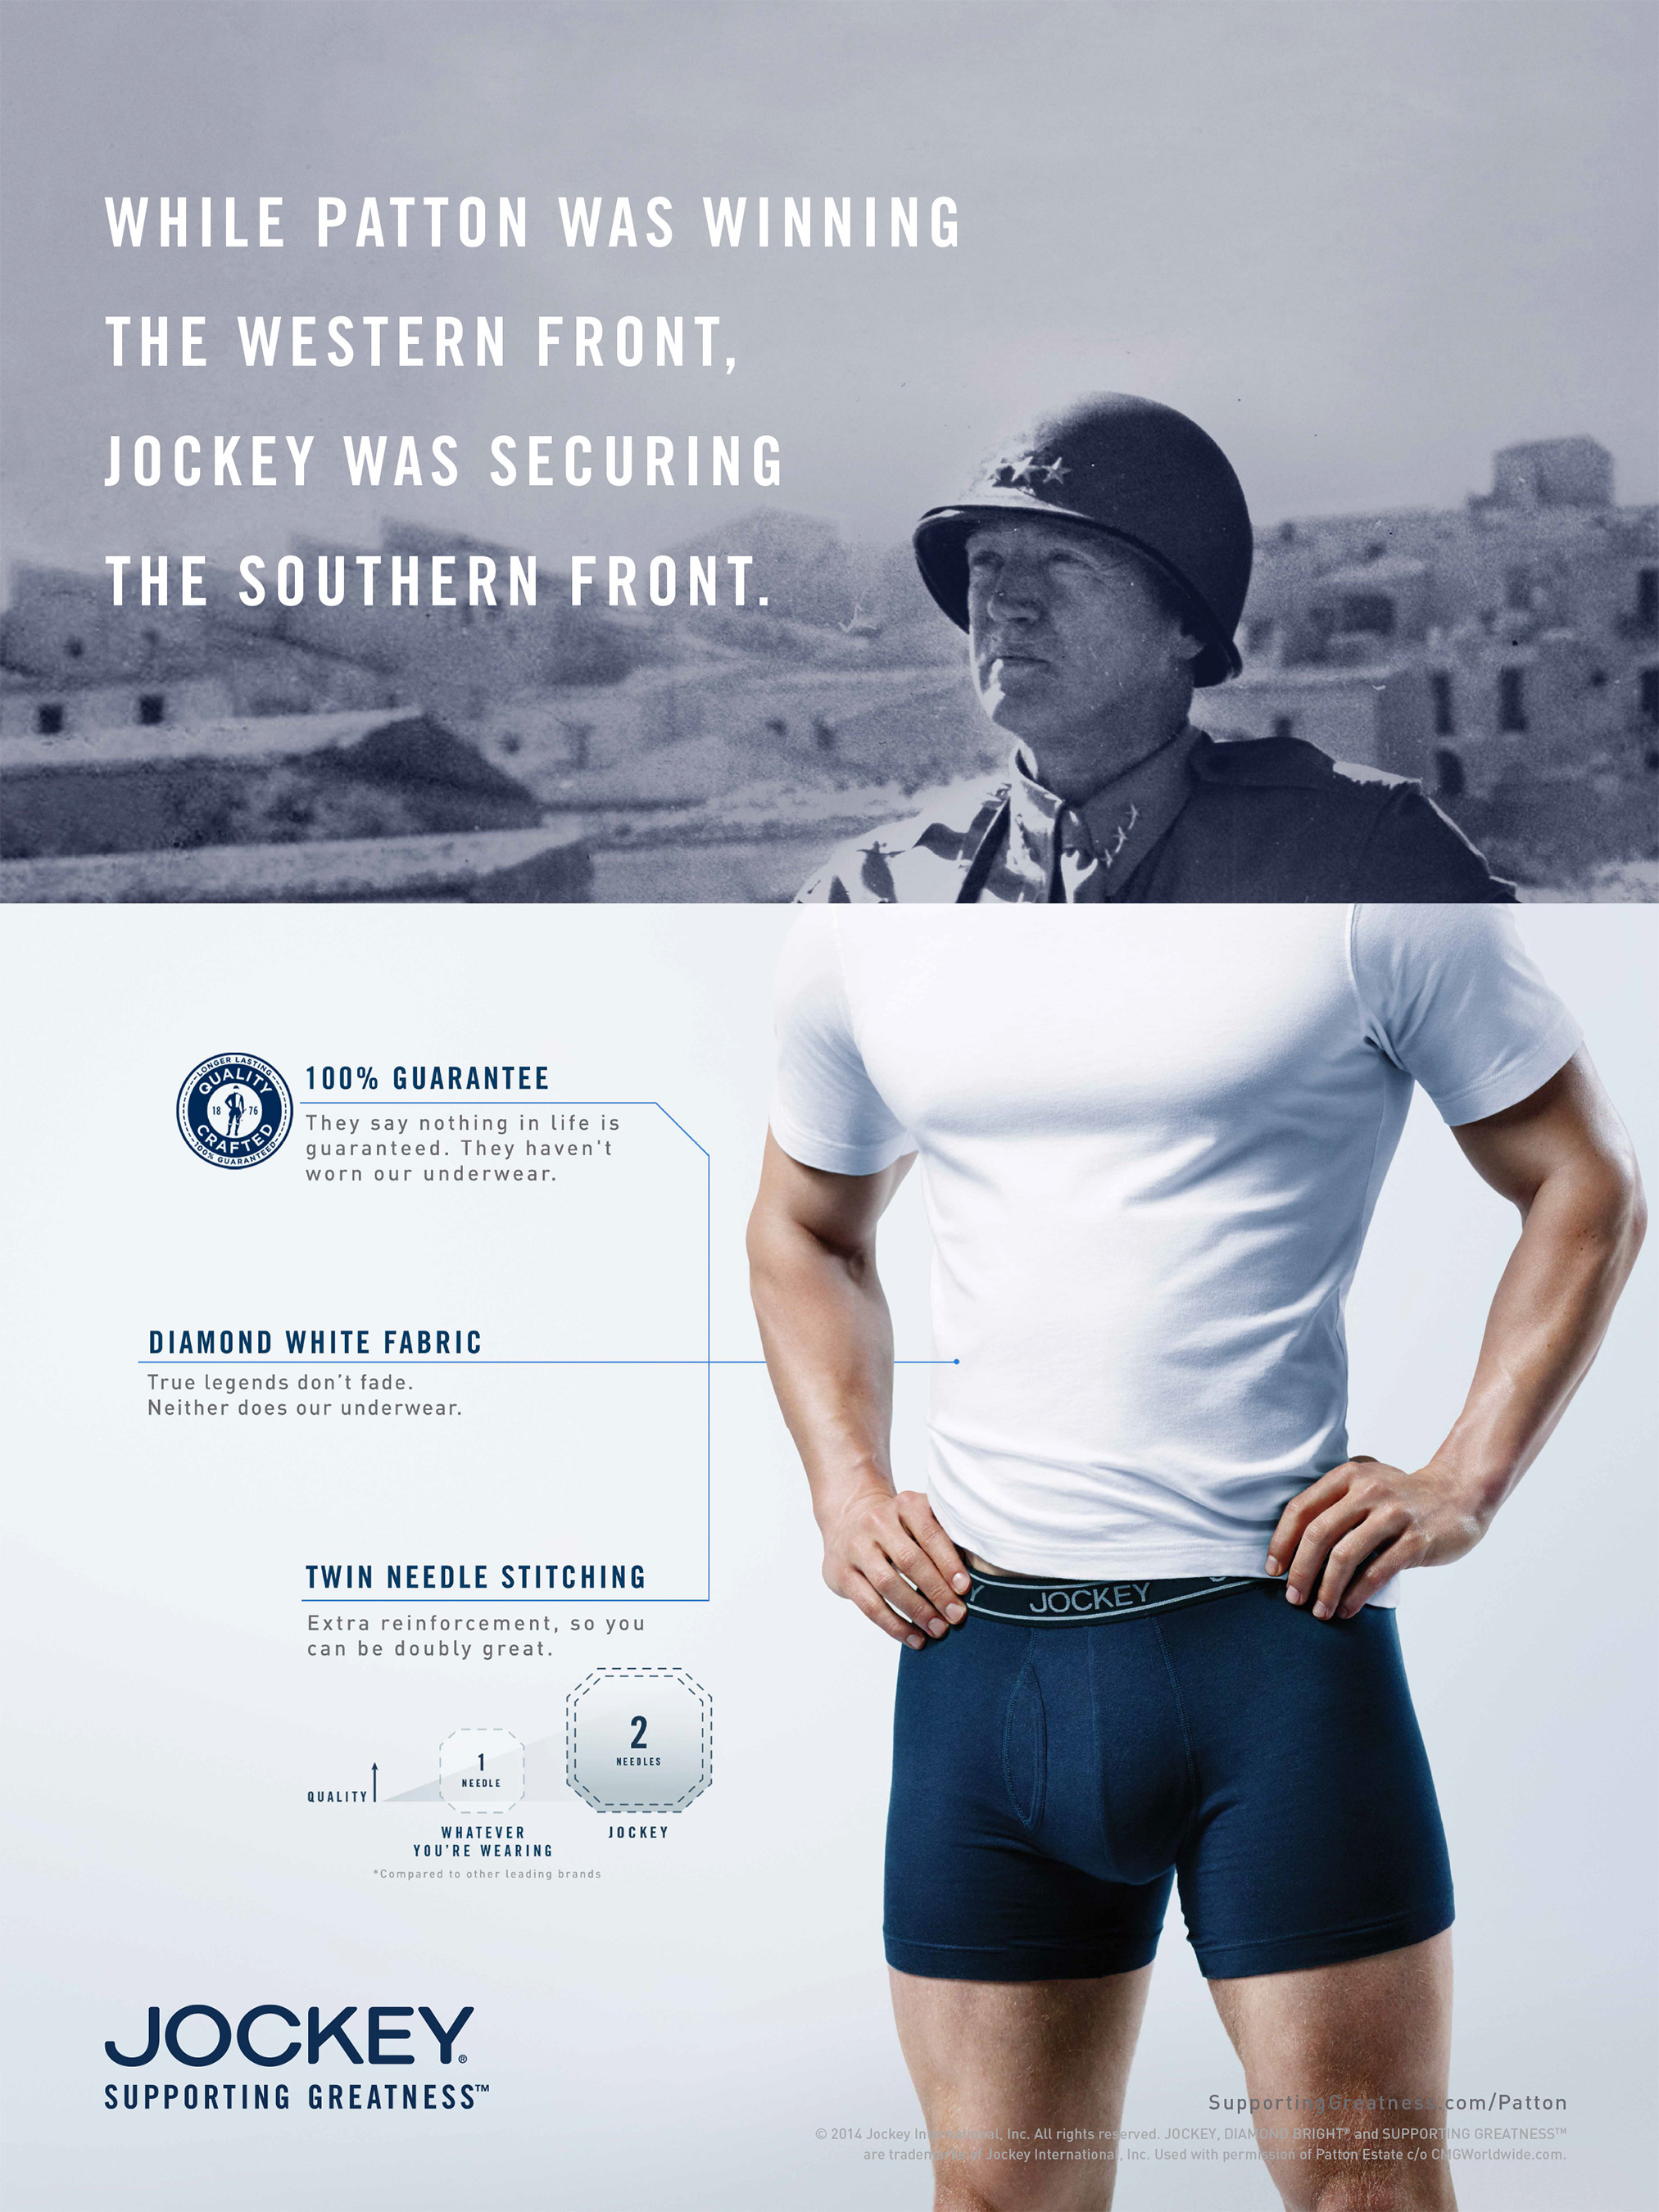 JOCKEY UNVEILS NEW MEN'S MARKETING CAMPAIGN “SUPPORTING GREATNESS”